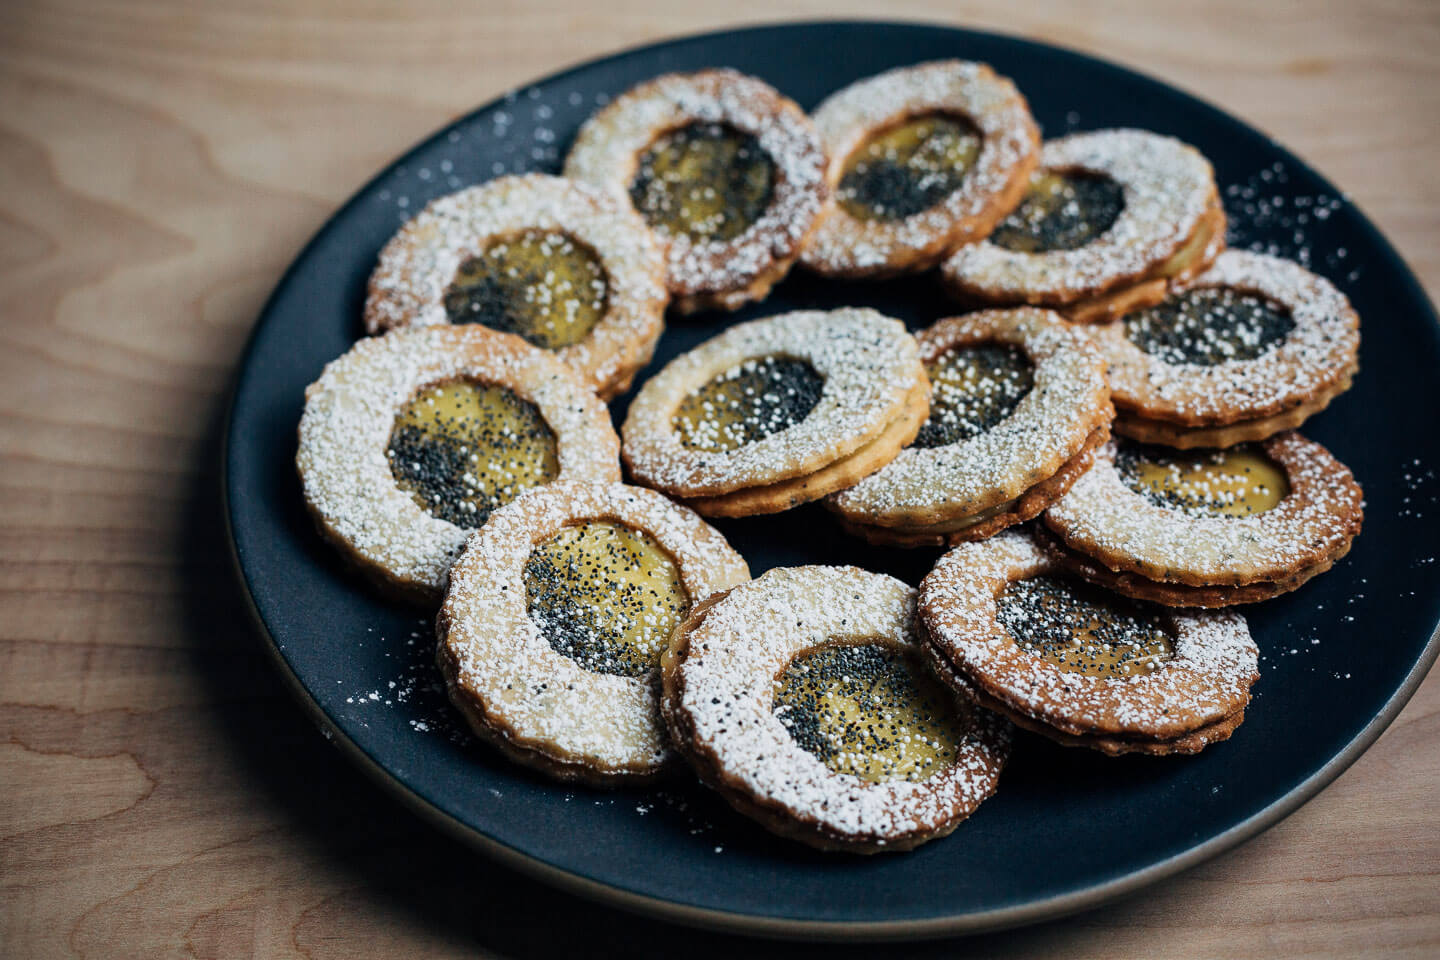 Buttery lemon poppy seed cookies with light, wonderfully bright Meyer lemon curd are a delightful holiday treat.